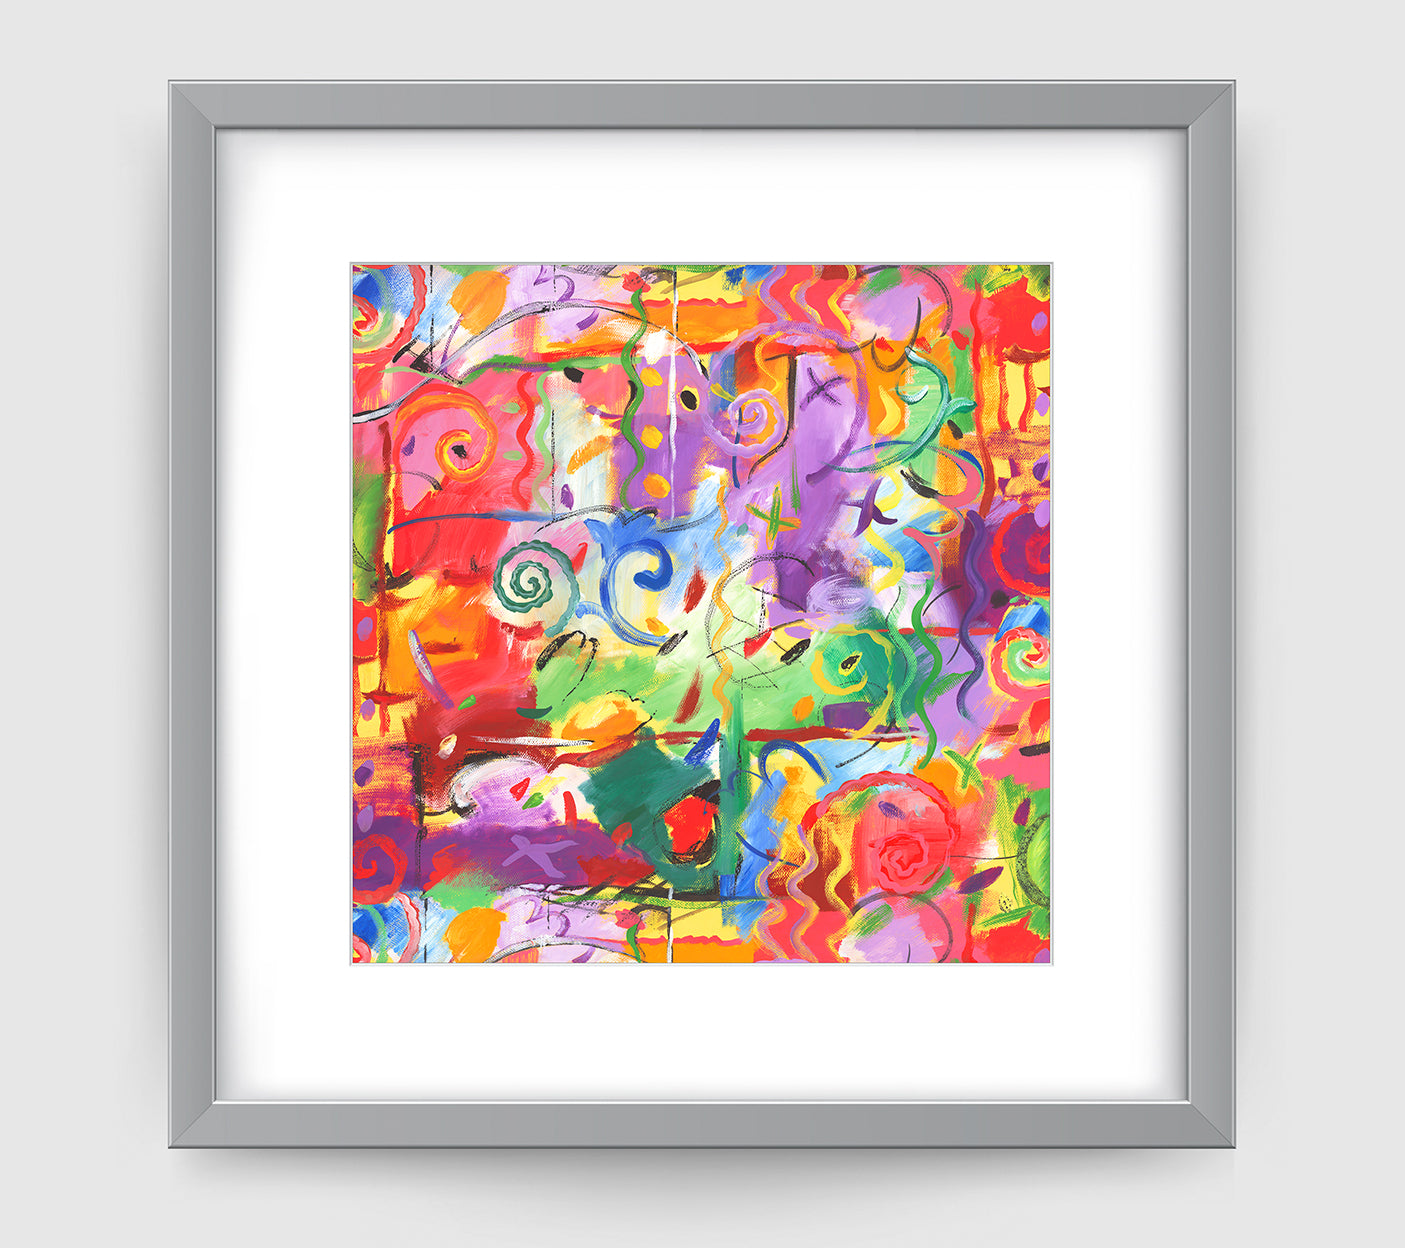 Le Fete Art Print - Abstract Art Wall Decor Collection-Di Lewis